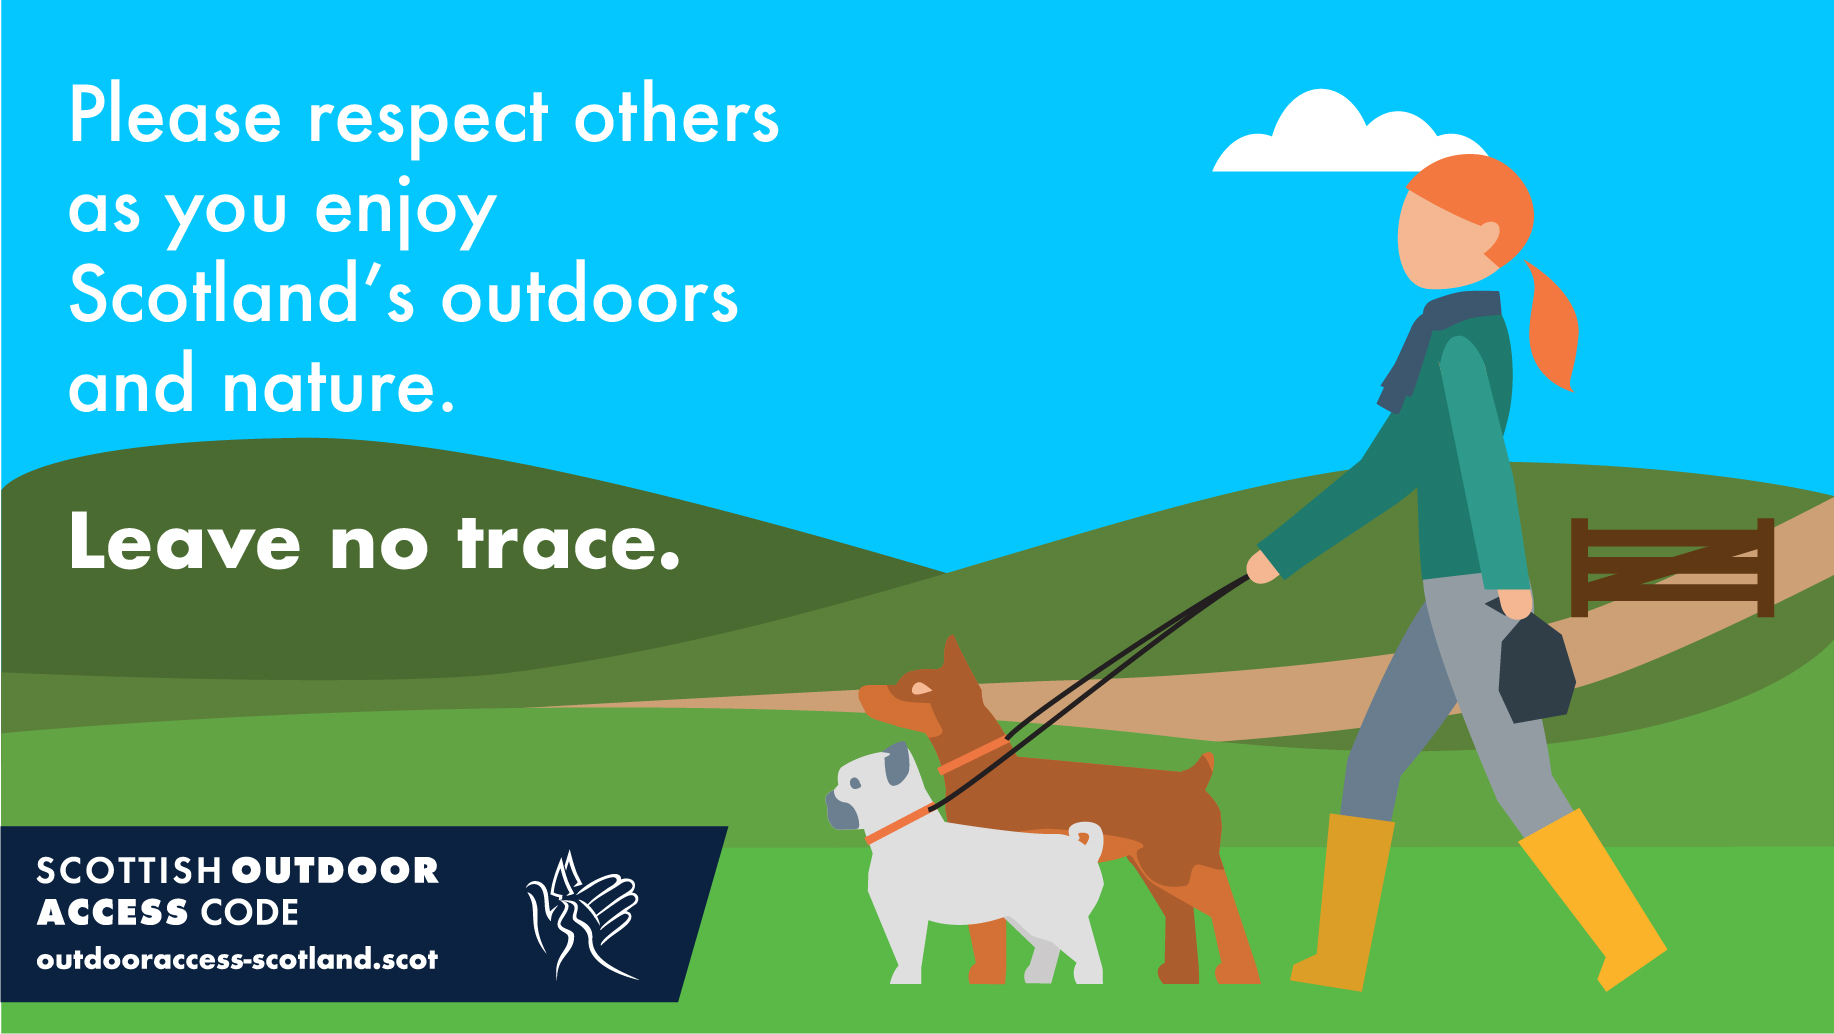 Respect each other, leave no trace.